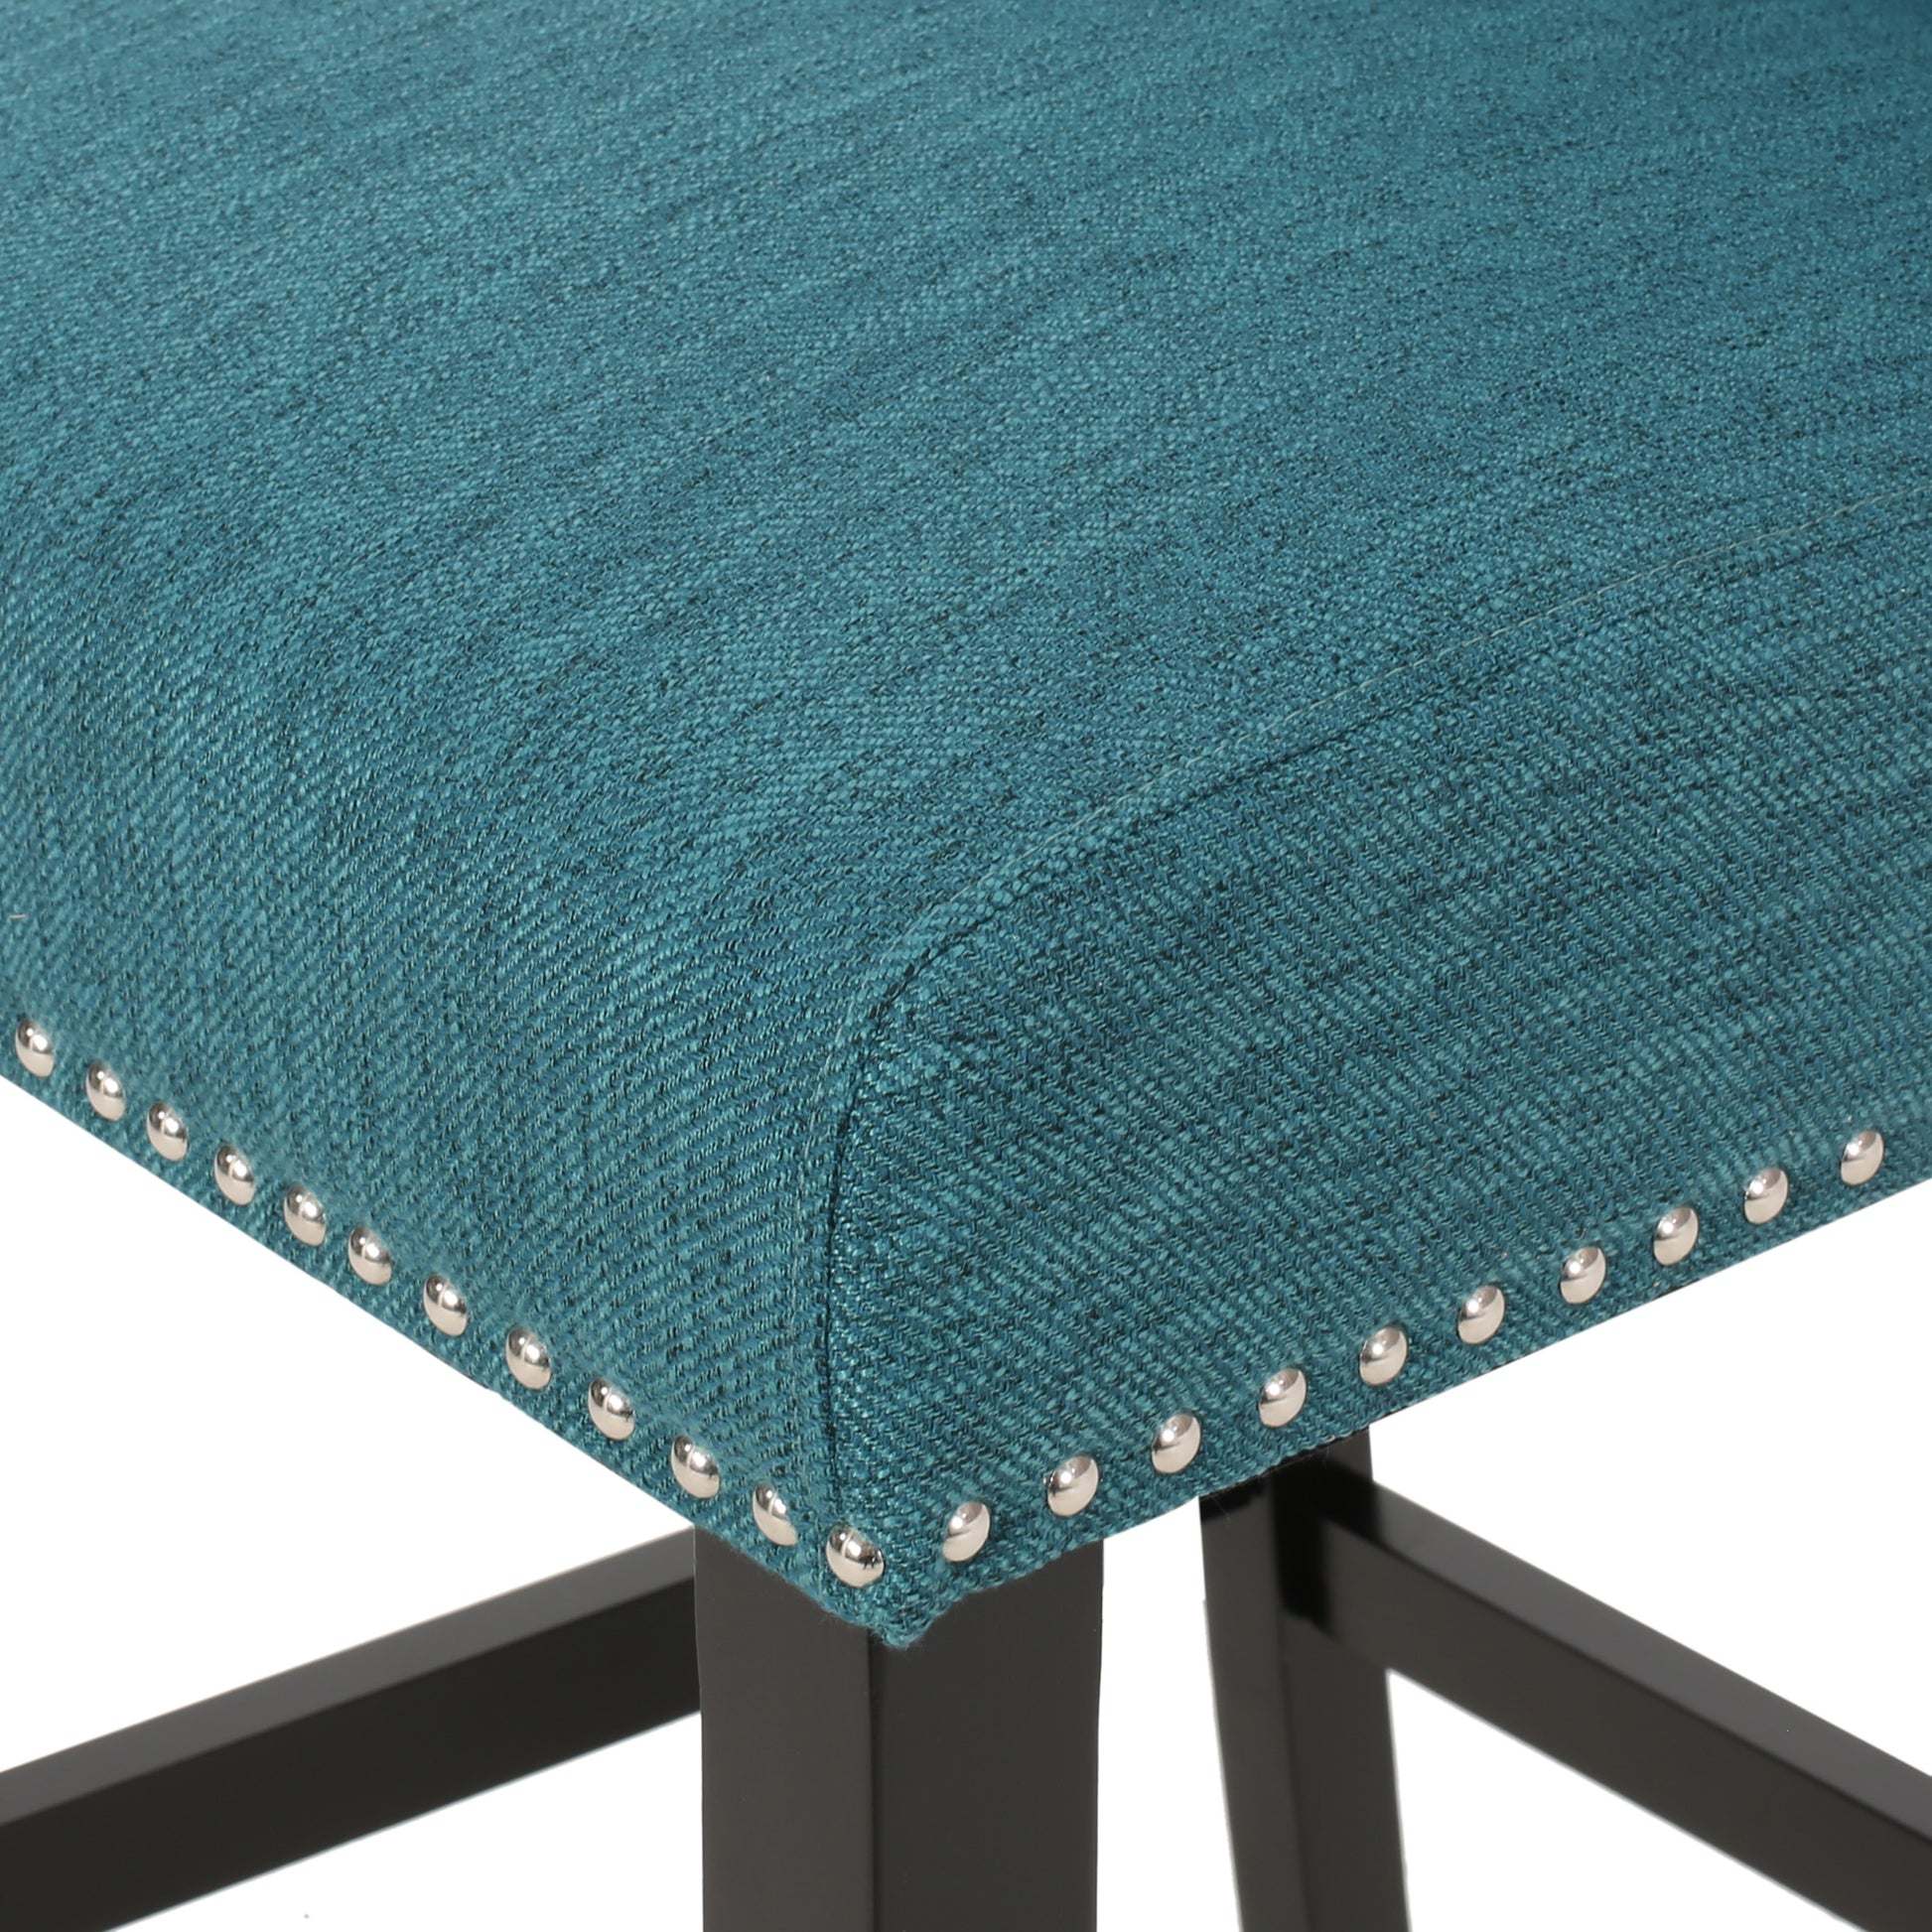 Vienna Contemporary Fabric Tufted Wingback 31 Inch teal-fabric